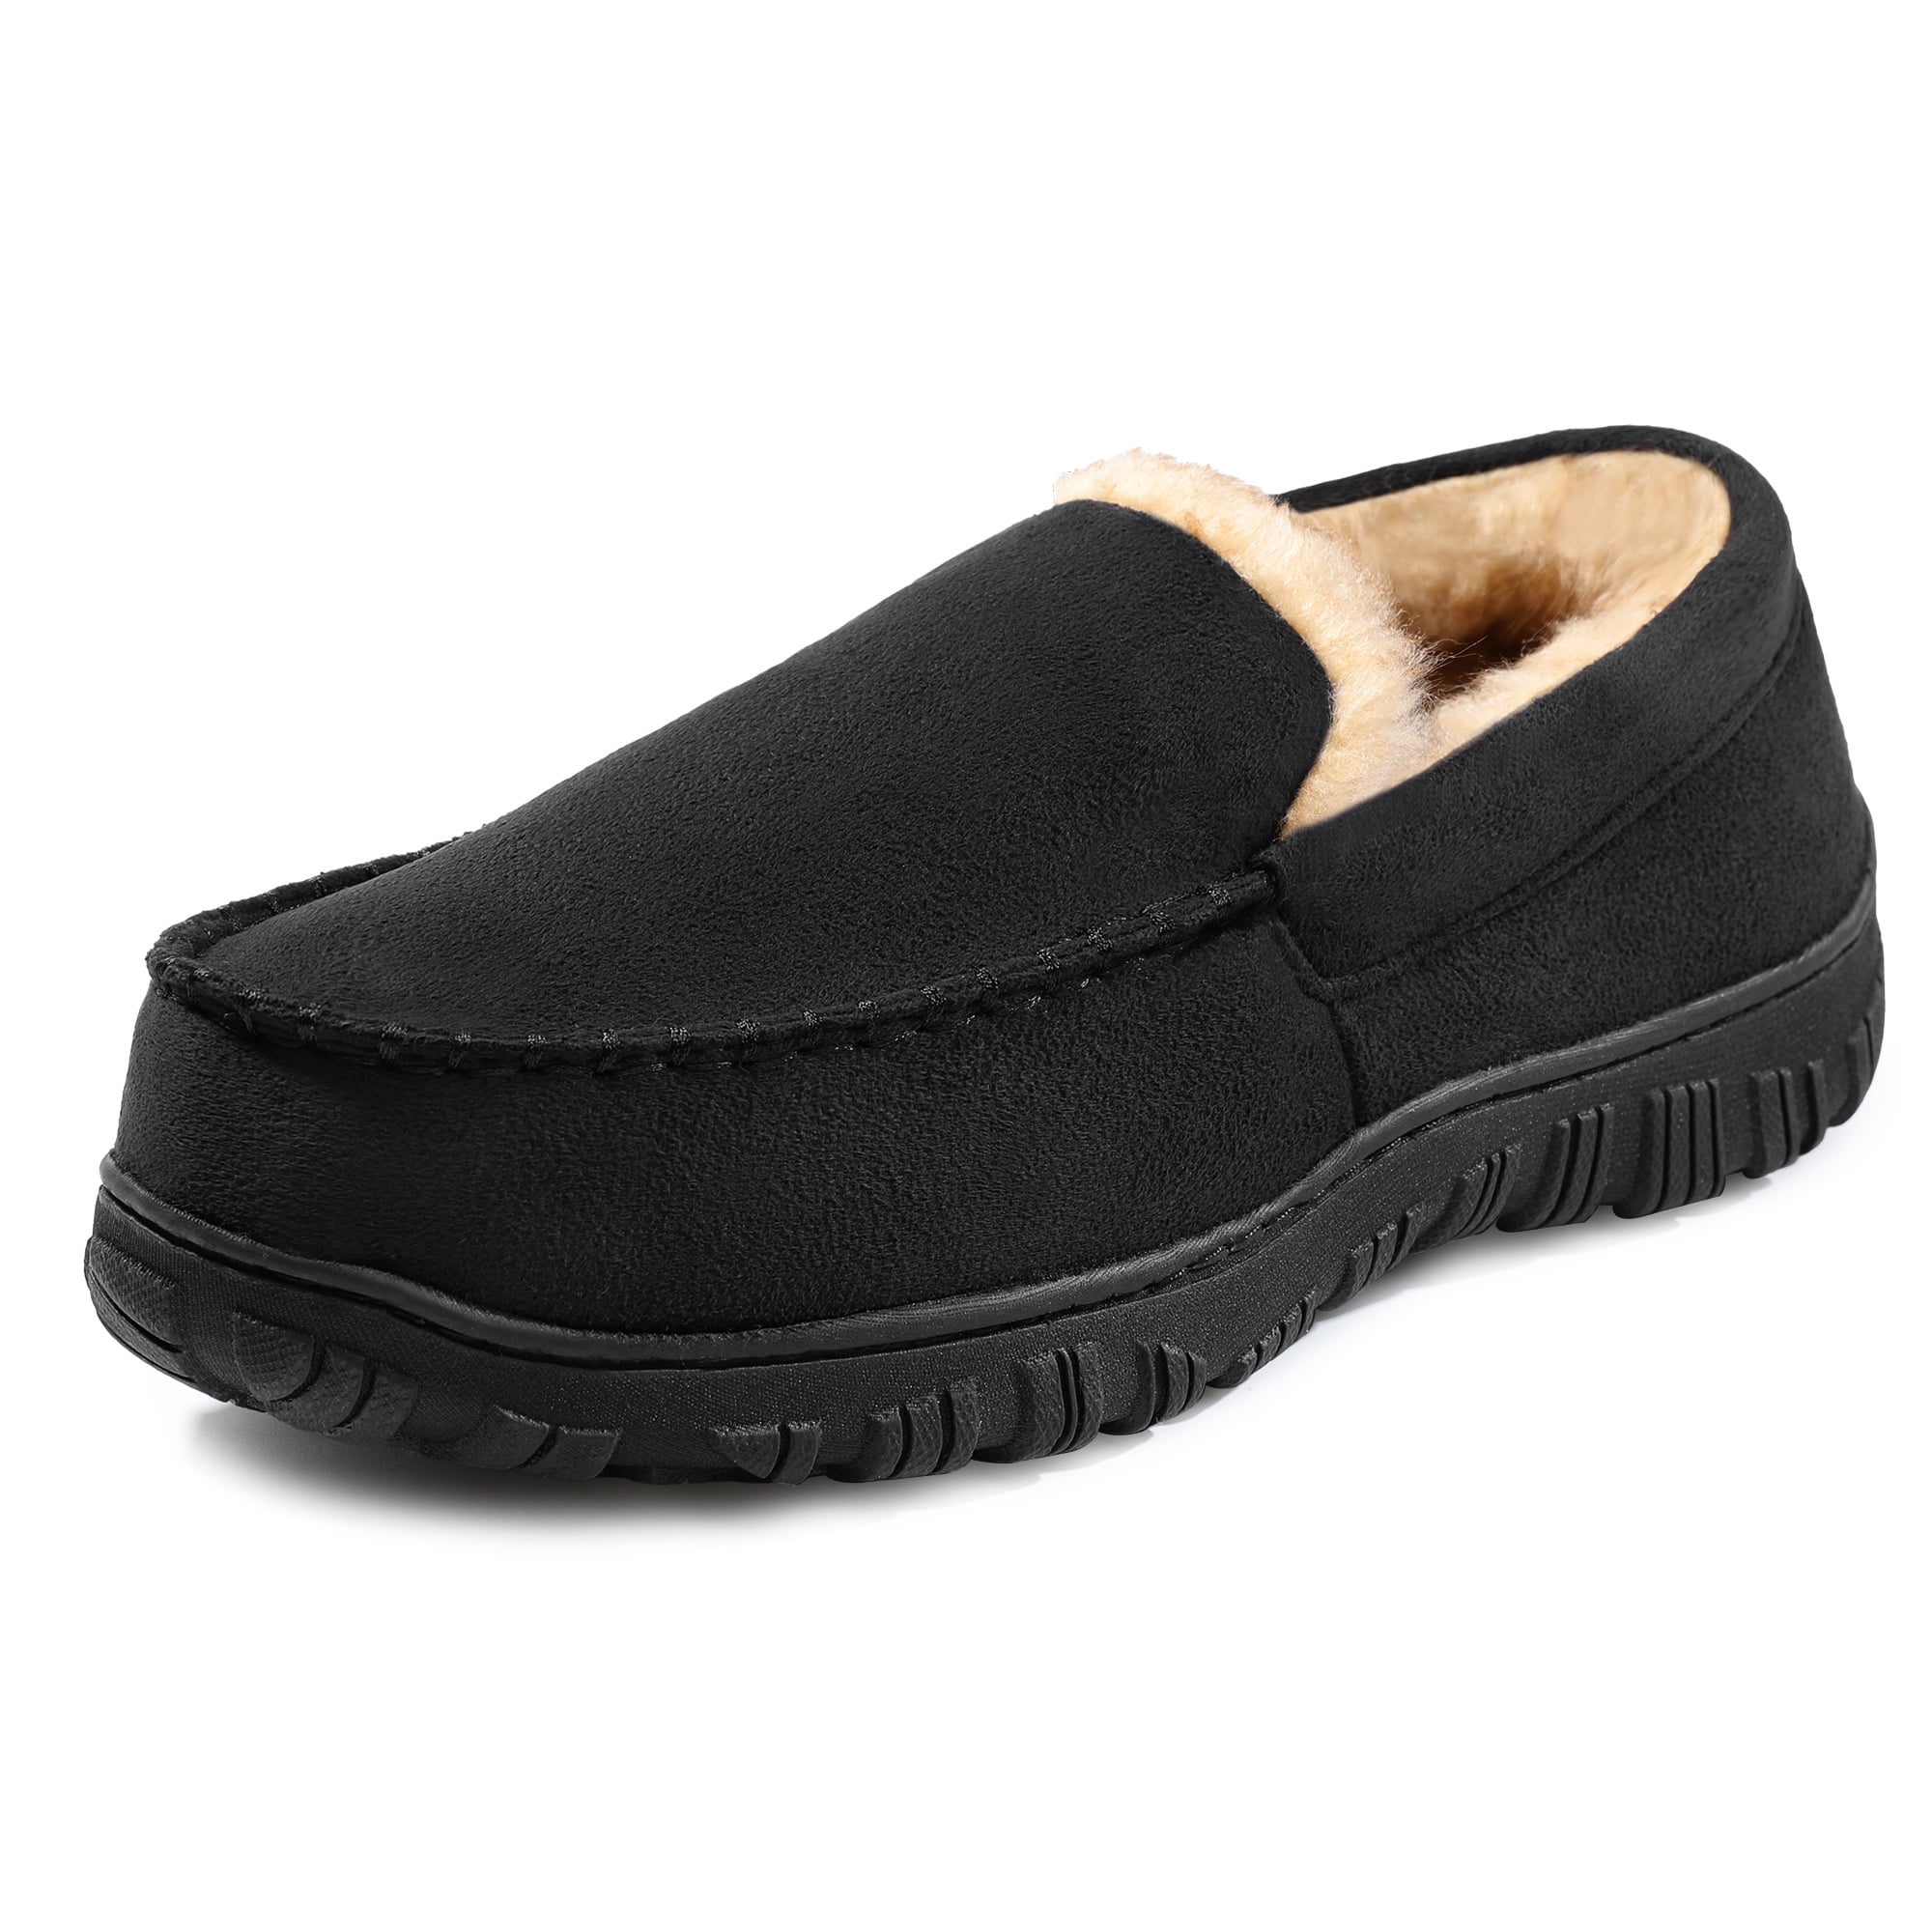 HOMEHOT Men's Slippers Mens Moccasin Slippers Memory Foam House Shoes ...